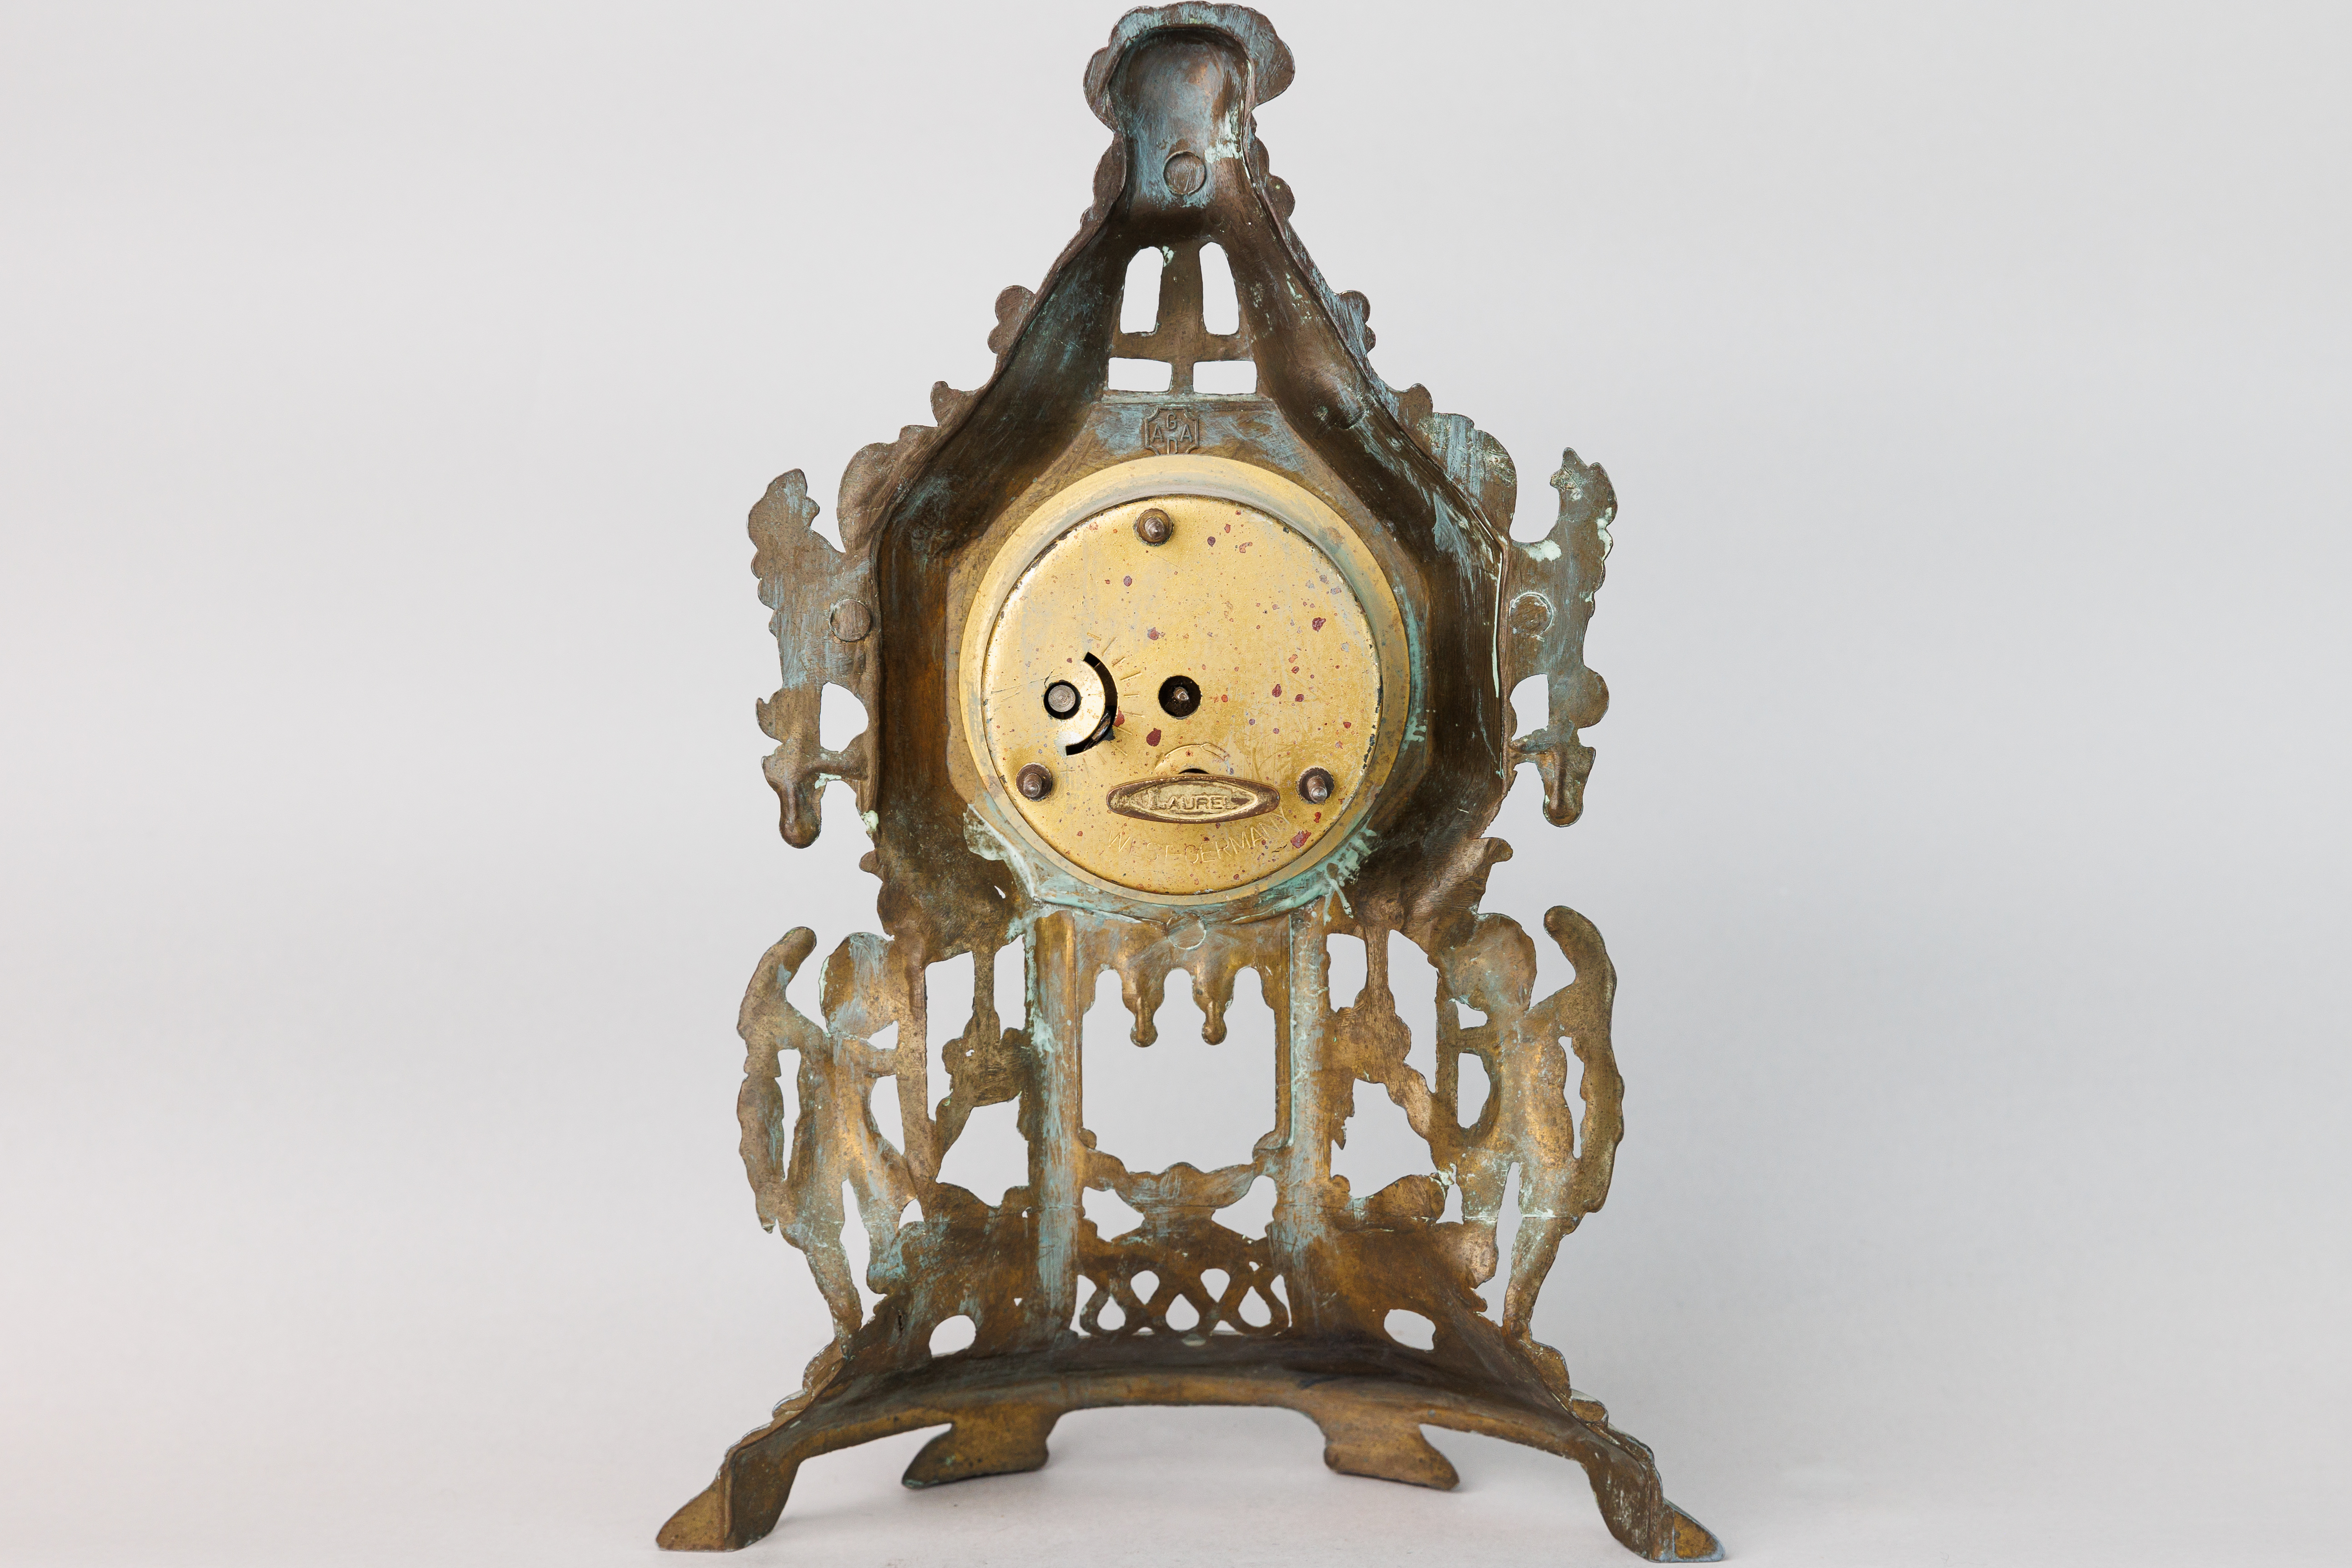 Ornated Table Clock - Image 2 of 2